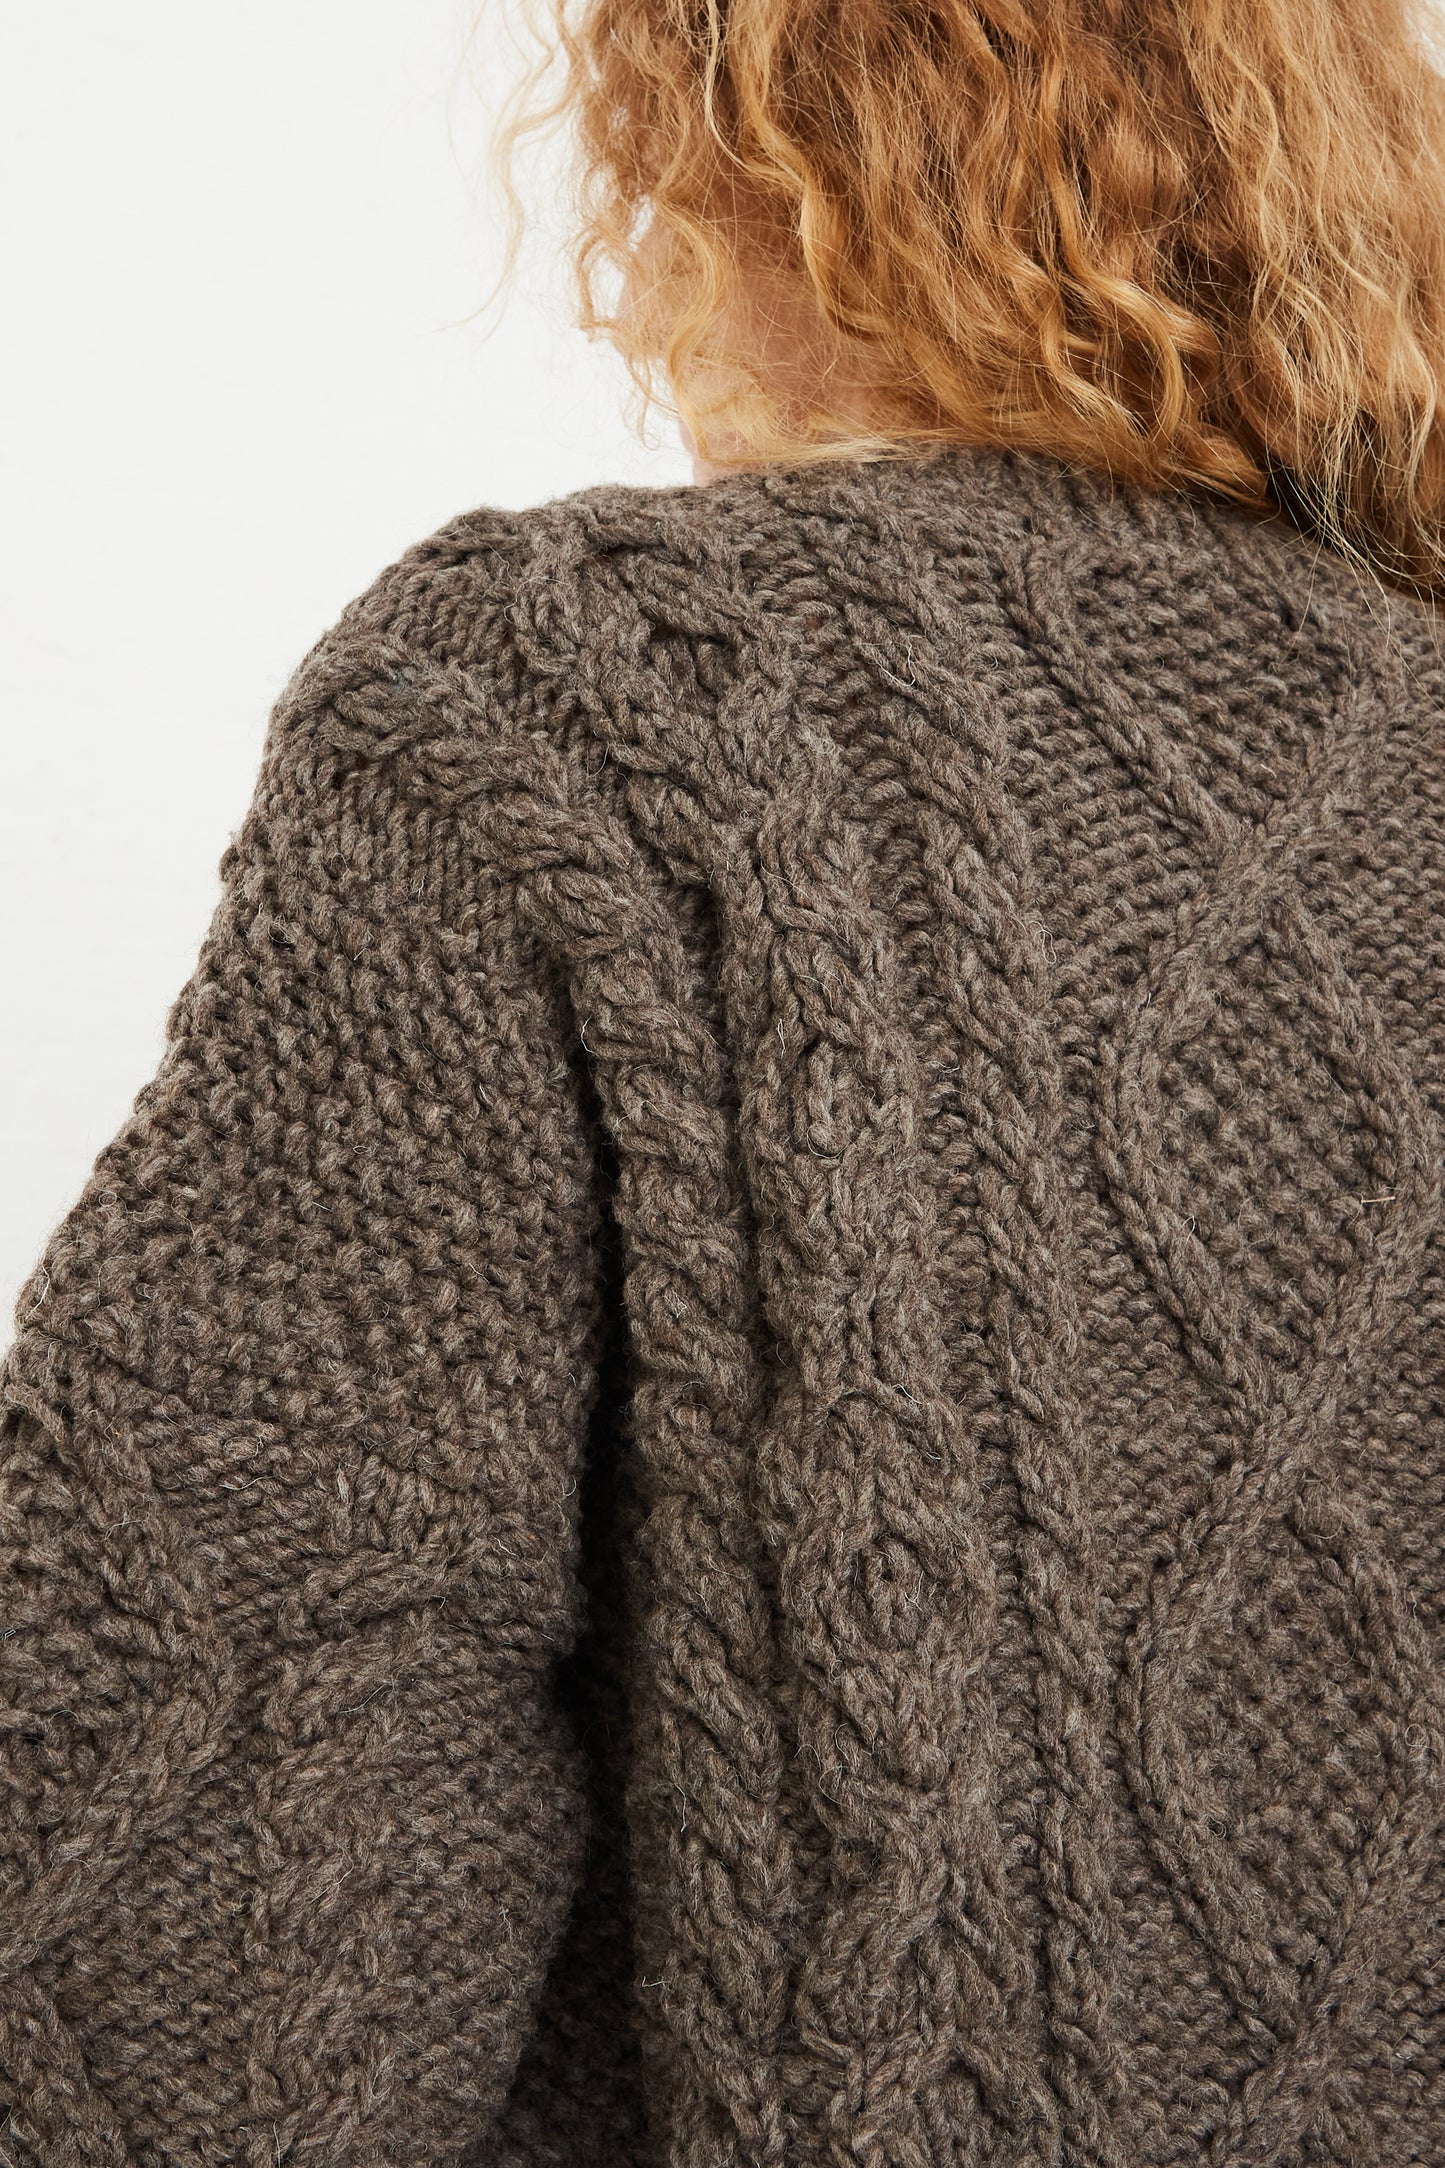 The back view of a model wearing an Ichi Antiquités Wool Hand-Knit Pullover in Mocha.